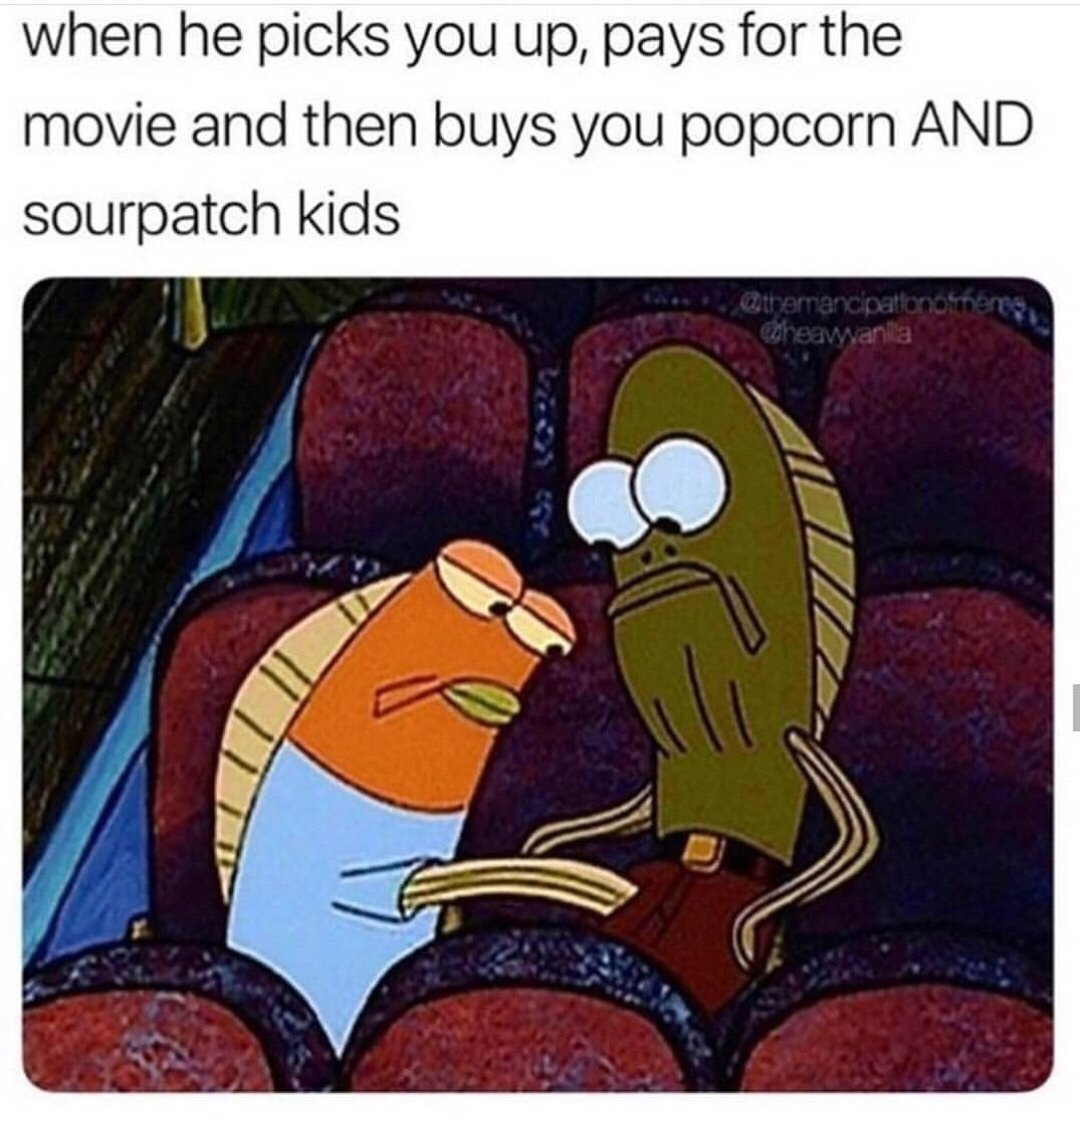 spongebob memes - when he picks you up, pays for the movie and then buys you popcorn And sourpatch kids